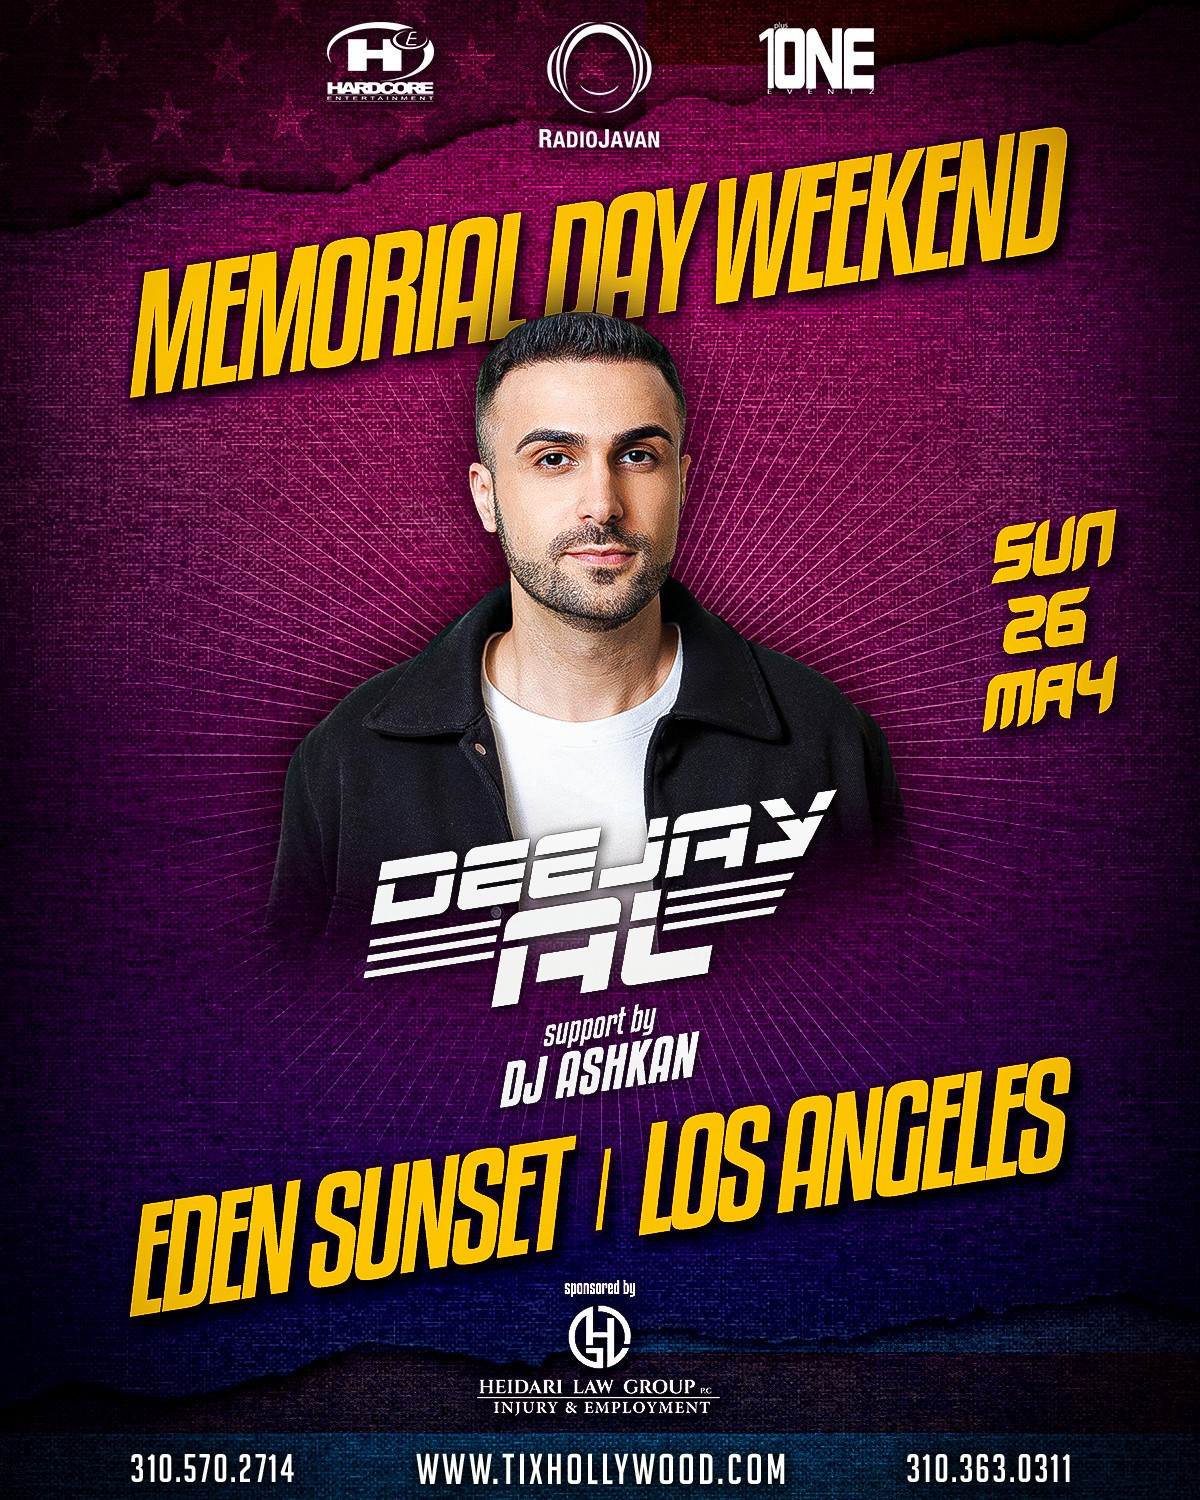 Memorial Day Wknd Party in Los Angeles feat DEEJAY AL Sunday, May 25 2024 @ Eden Sunset on May 26, 22:00@EDEN SUNSET - Buy tickets and Get information on HARDCORE & PLUS ONE tixhollywood.com